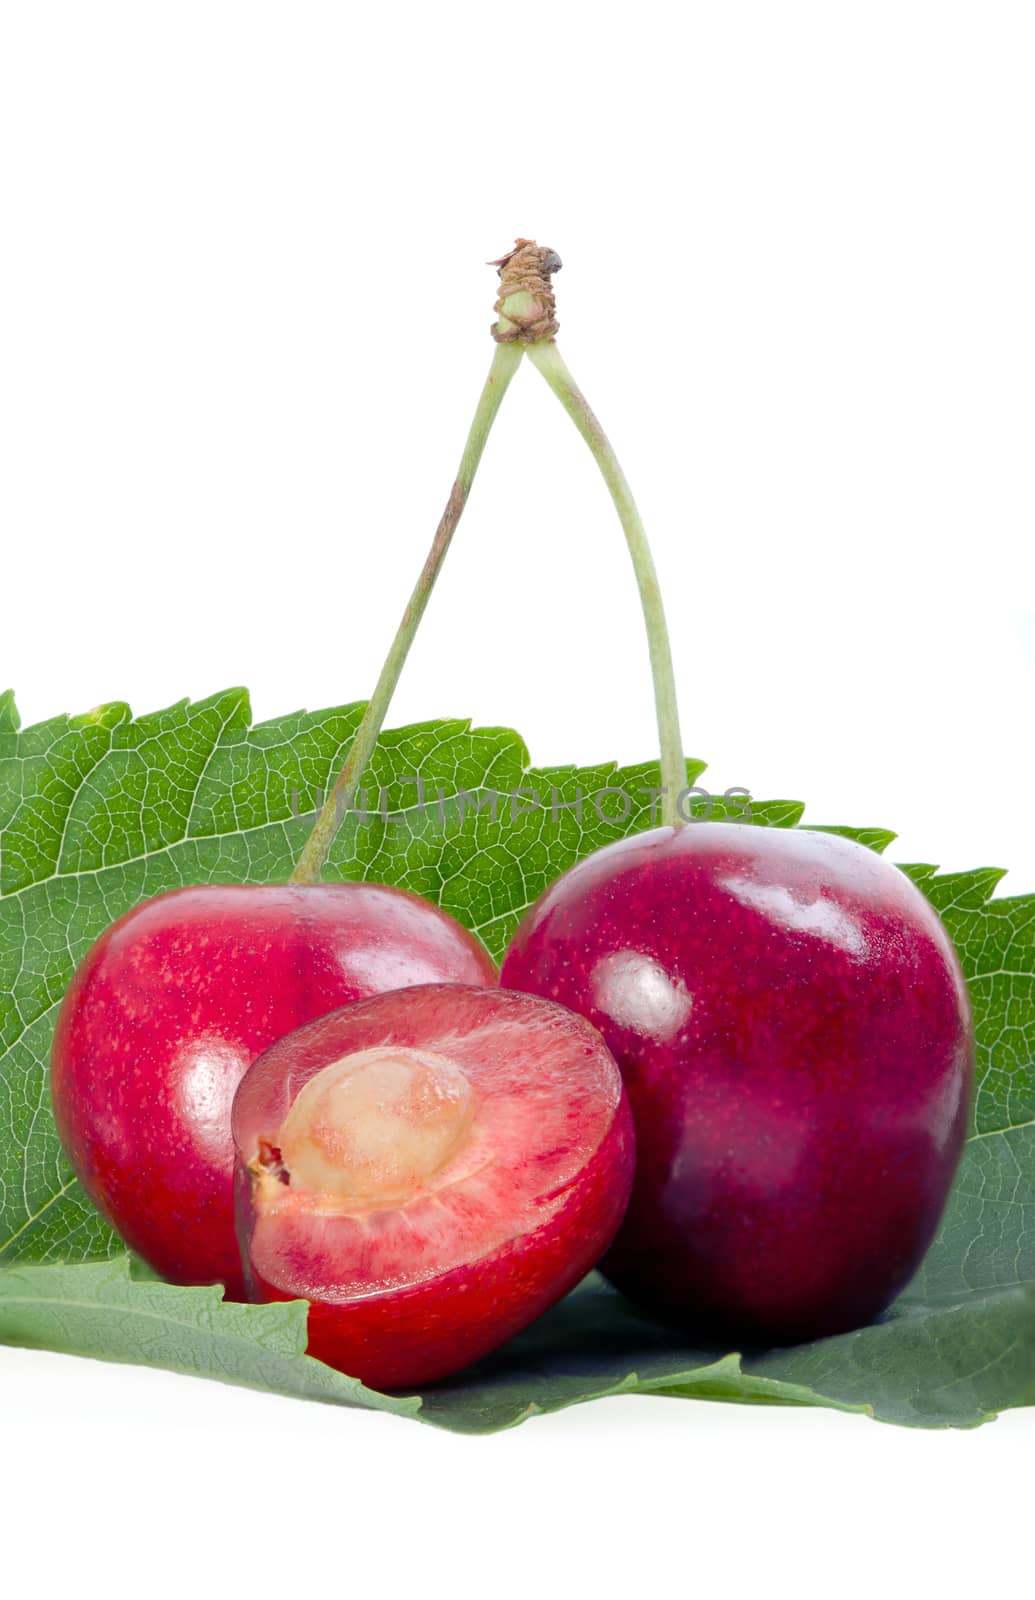 Two and one cutted cherries on a leaf.